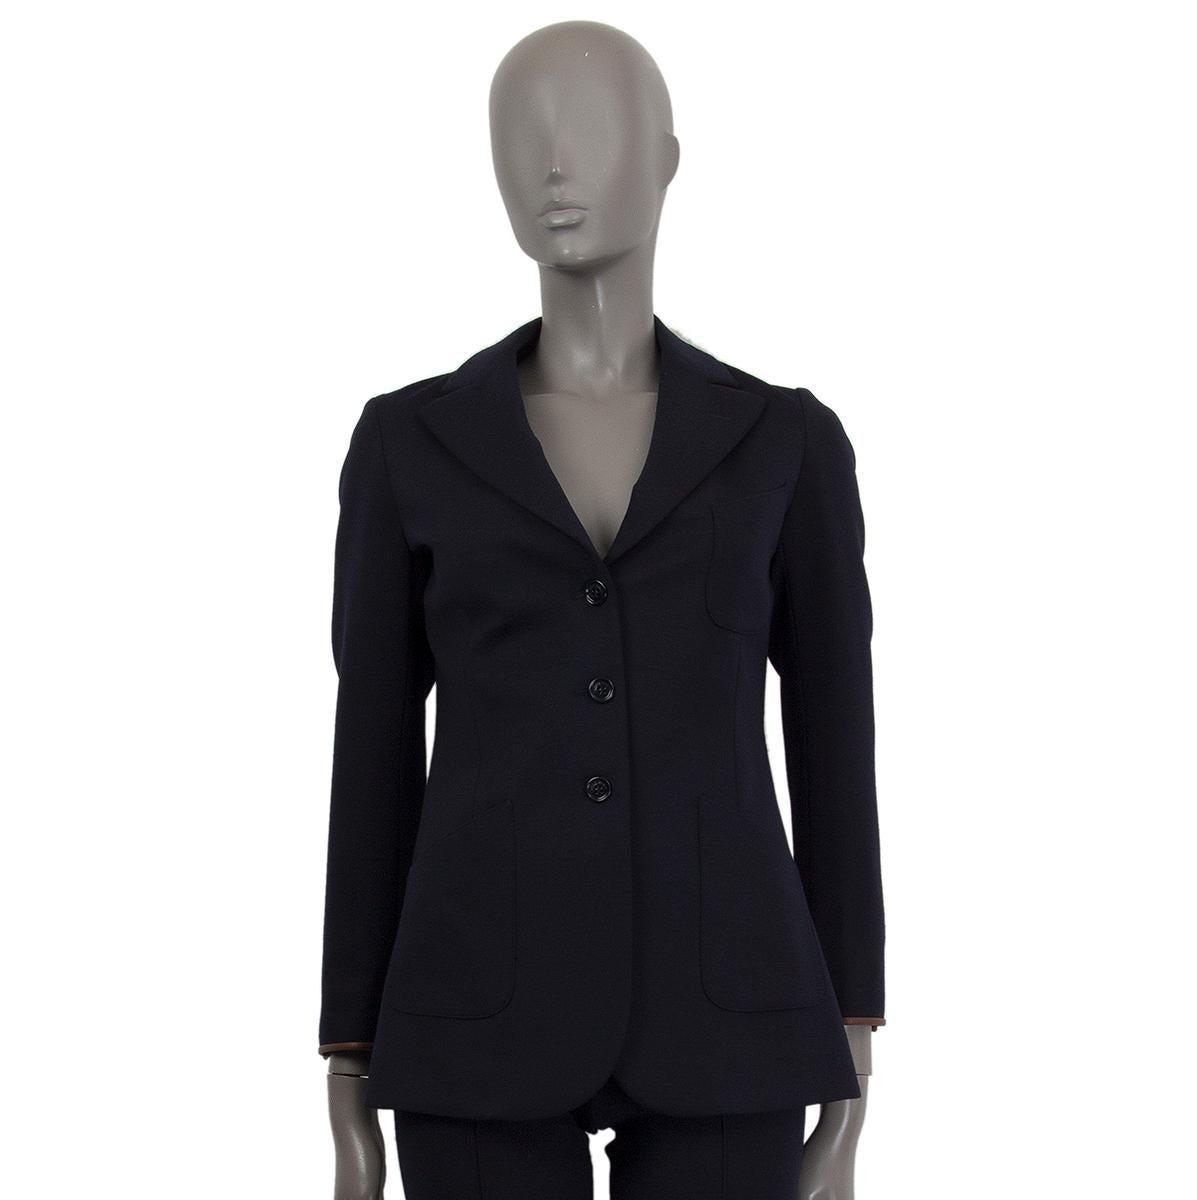 Loro Piana blazer in midnight blue virgin wool (88%), polyamide (10%) and elastan (2%) with brown leather hem. Three front pockets. Opens with three buttons on the front. Lined in navy blue and white and nude brown striped silk (100%). Has been worn